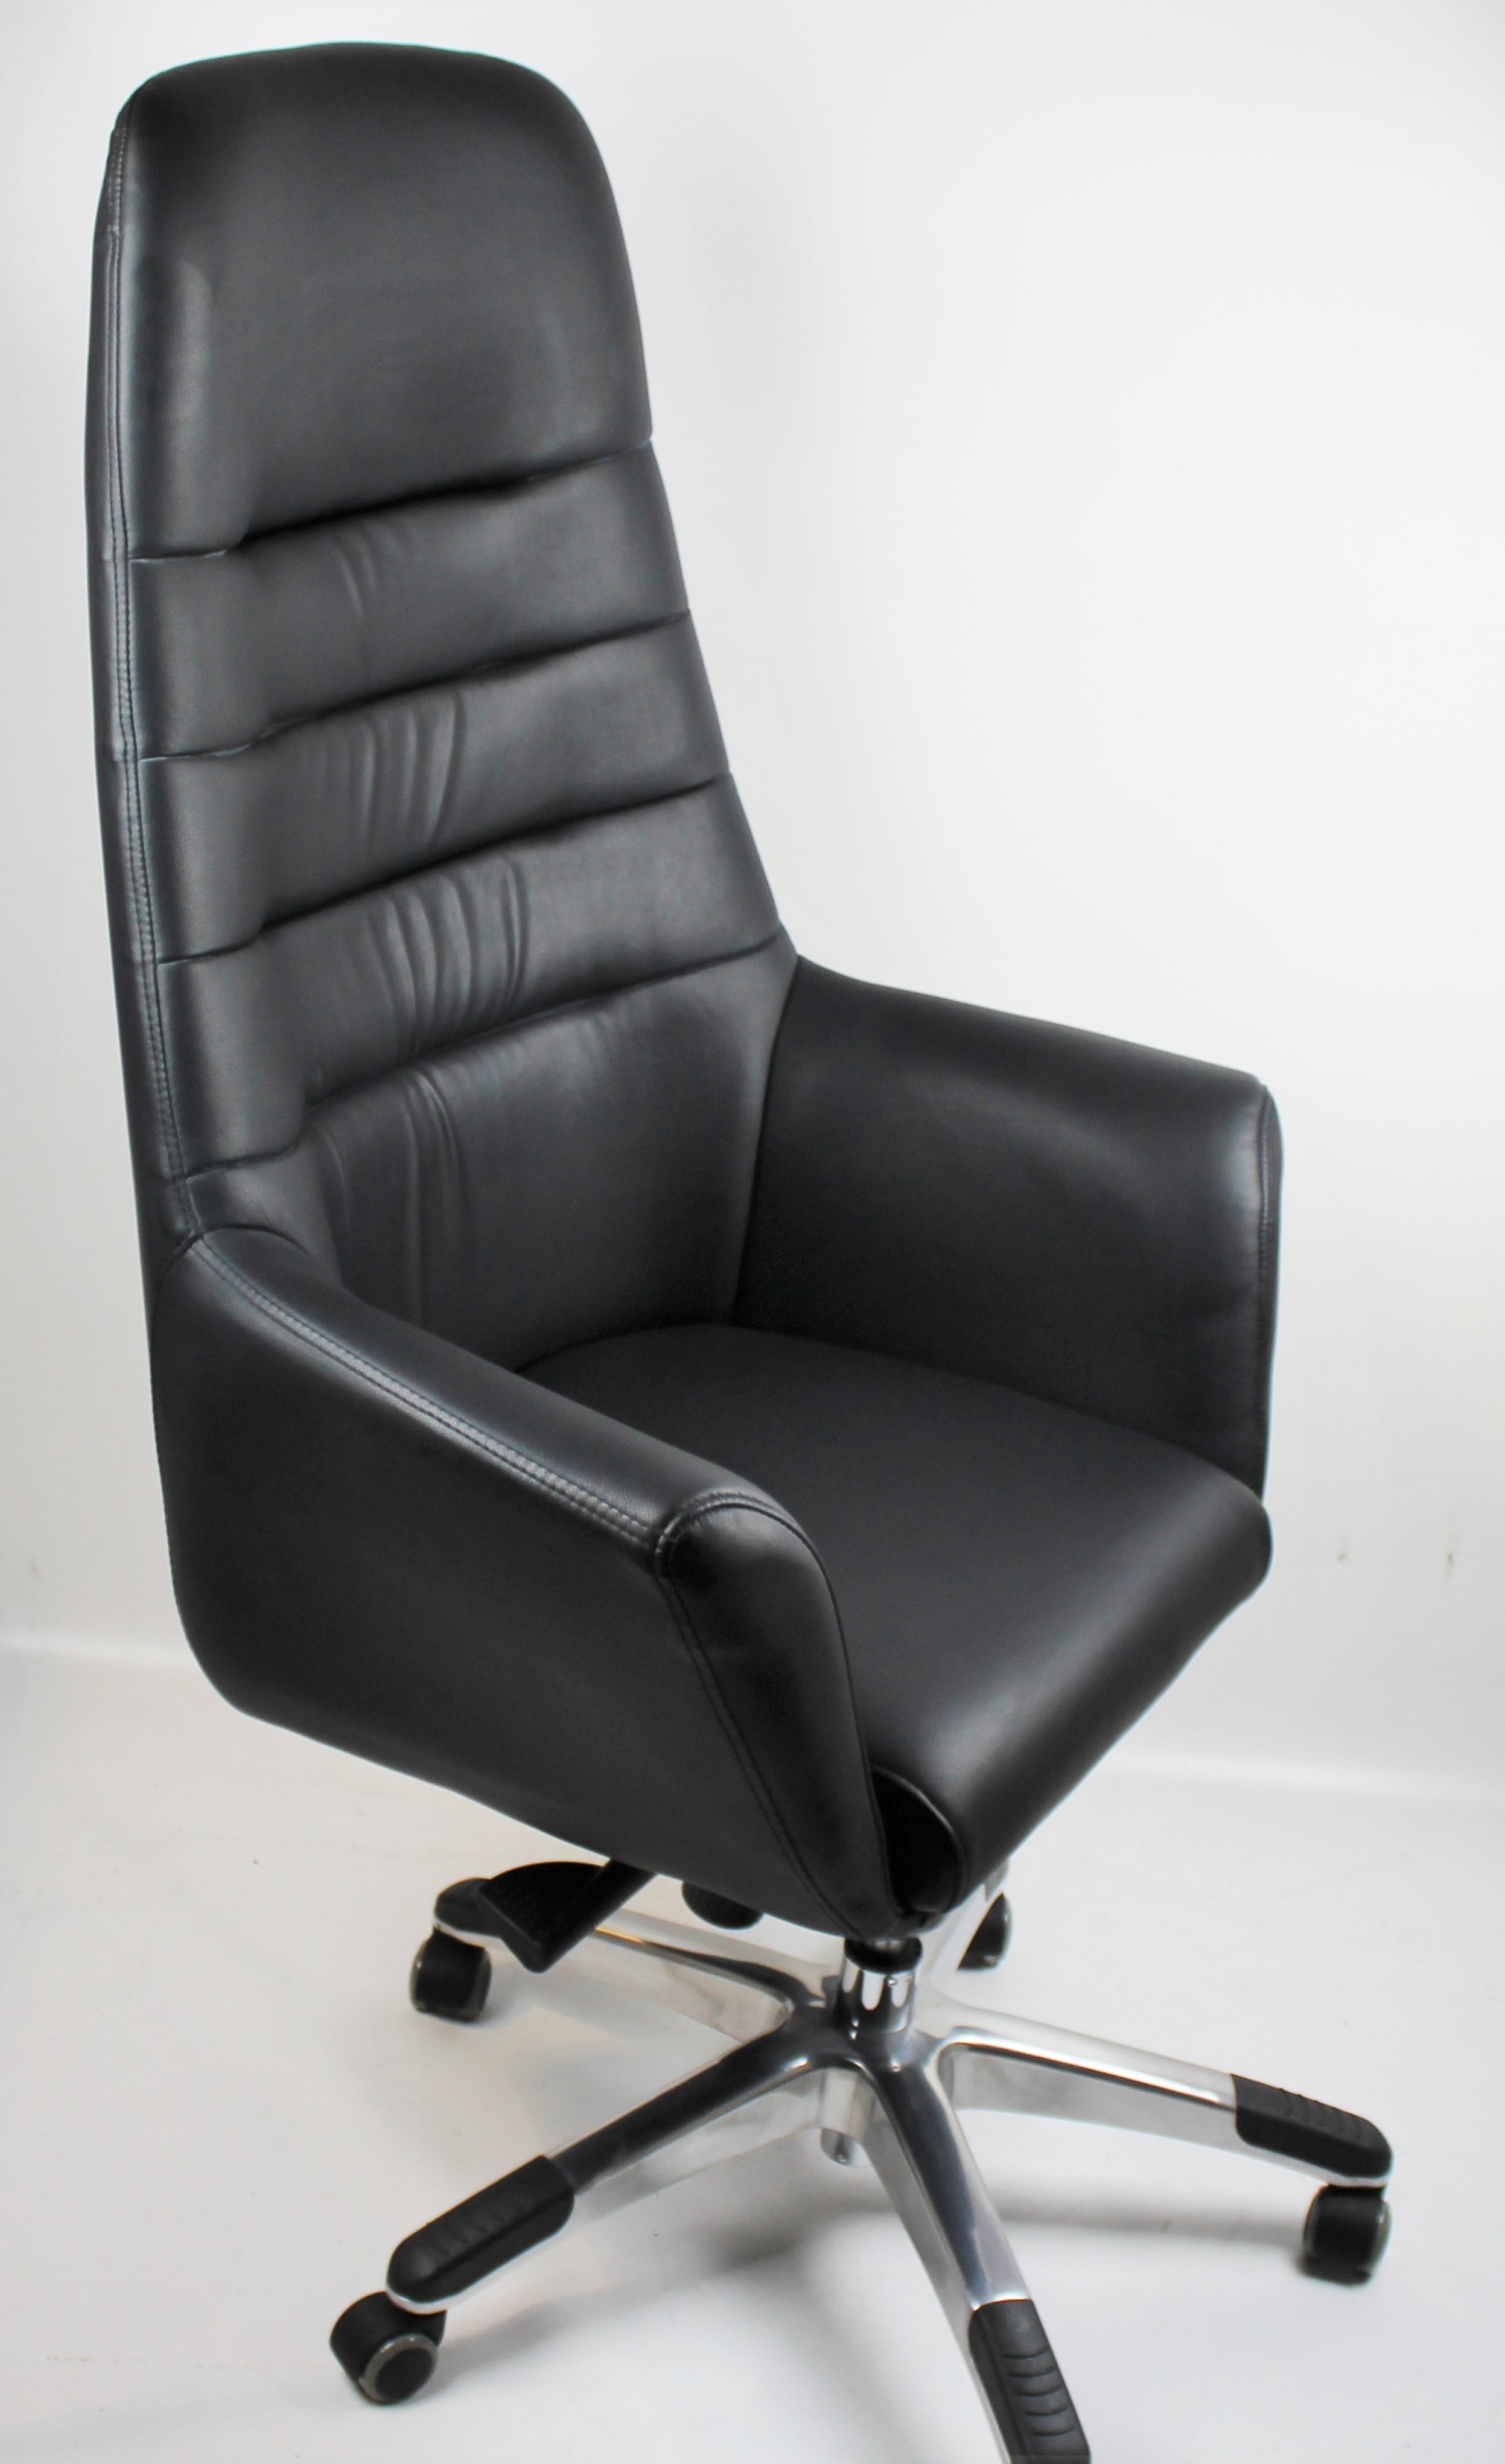 Office Chair In Black With Swivel GRA-CHA-506A-BLK North Yorkshire